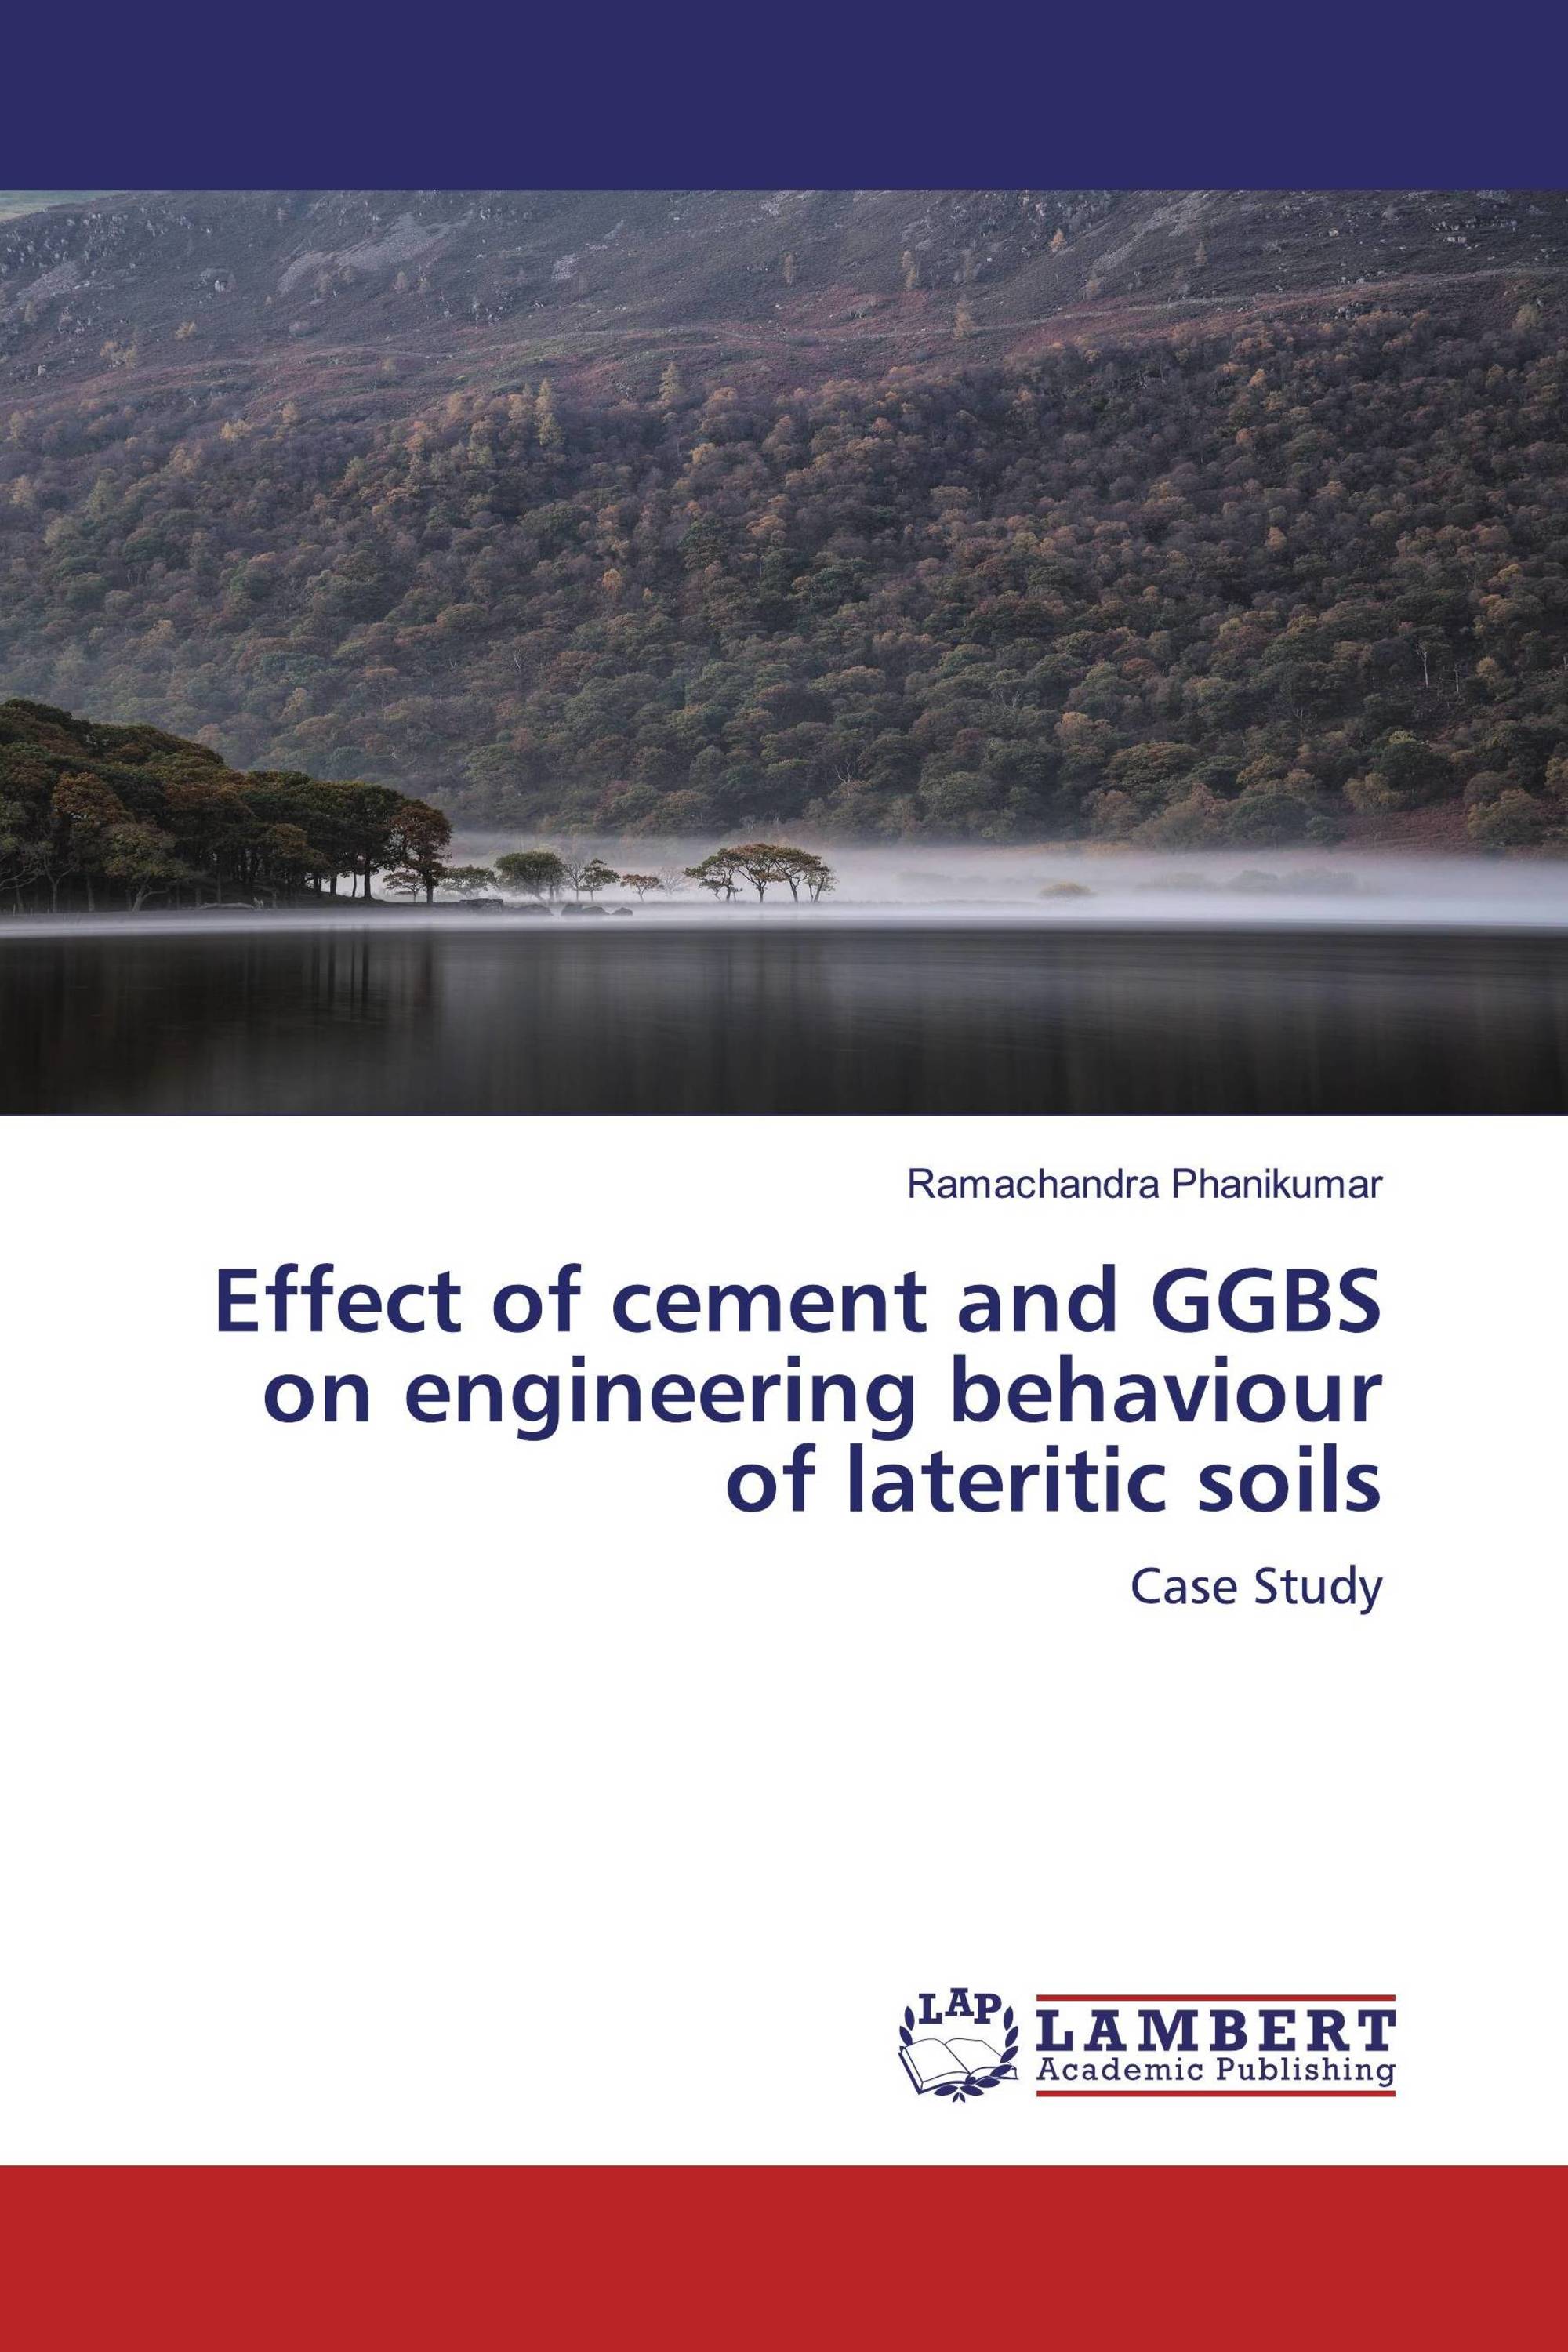 Effect of cement and GGBS on engineering behaviour of lateritic soils